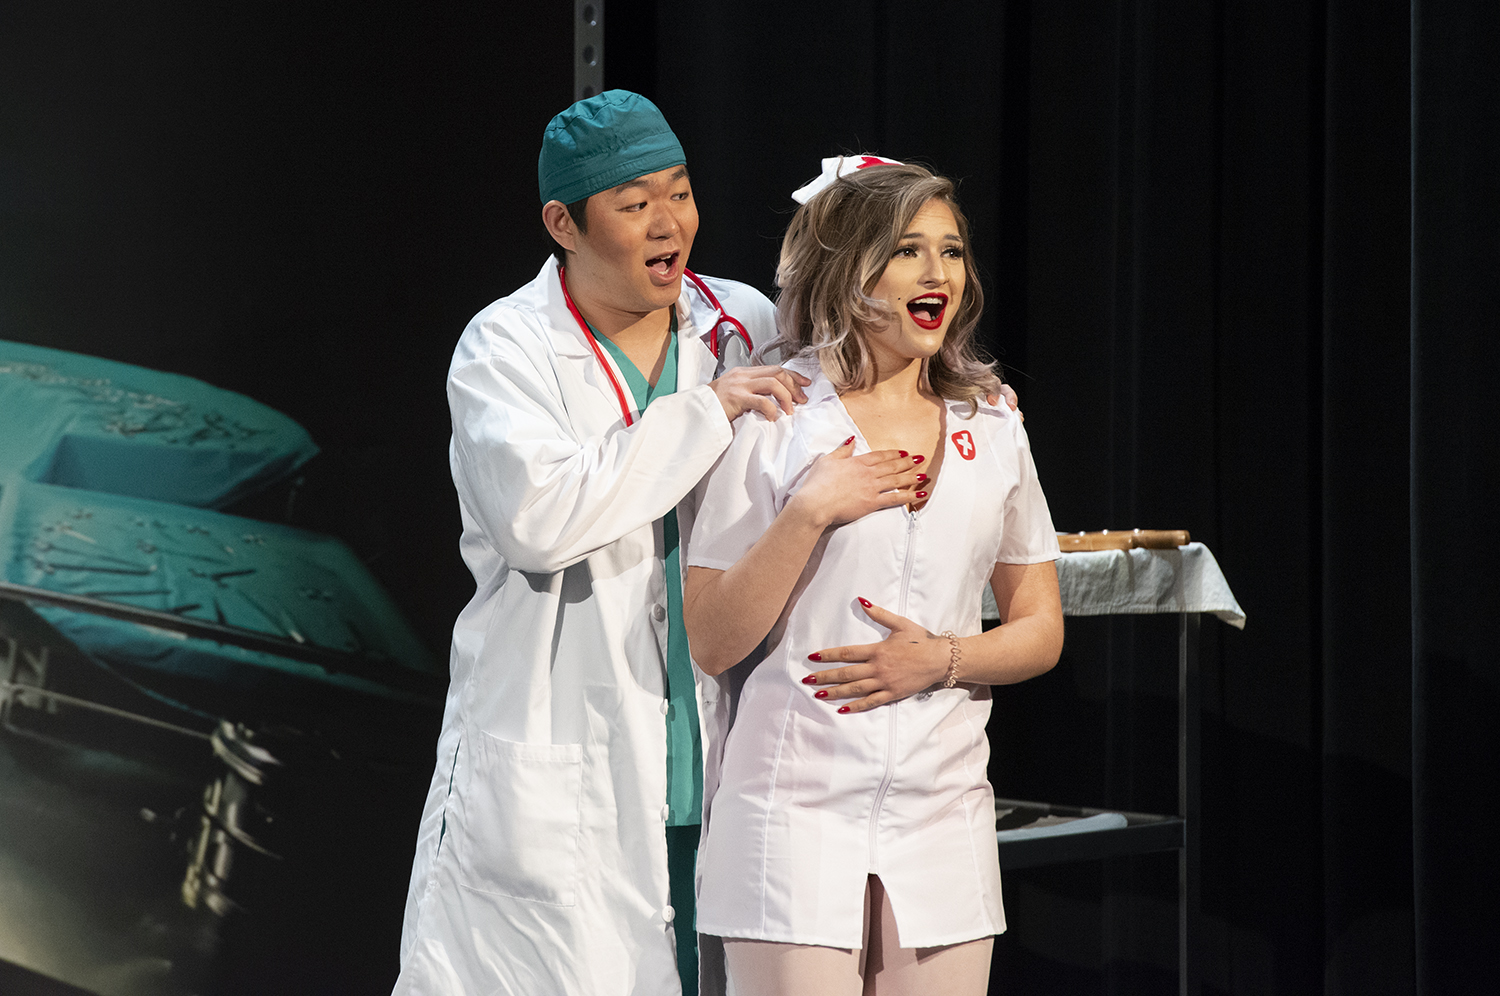 Performance of "Gallantry", a nurse and doctor are together